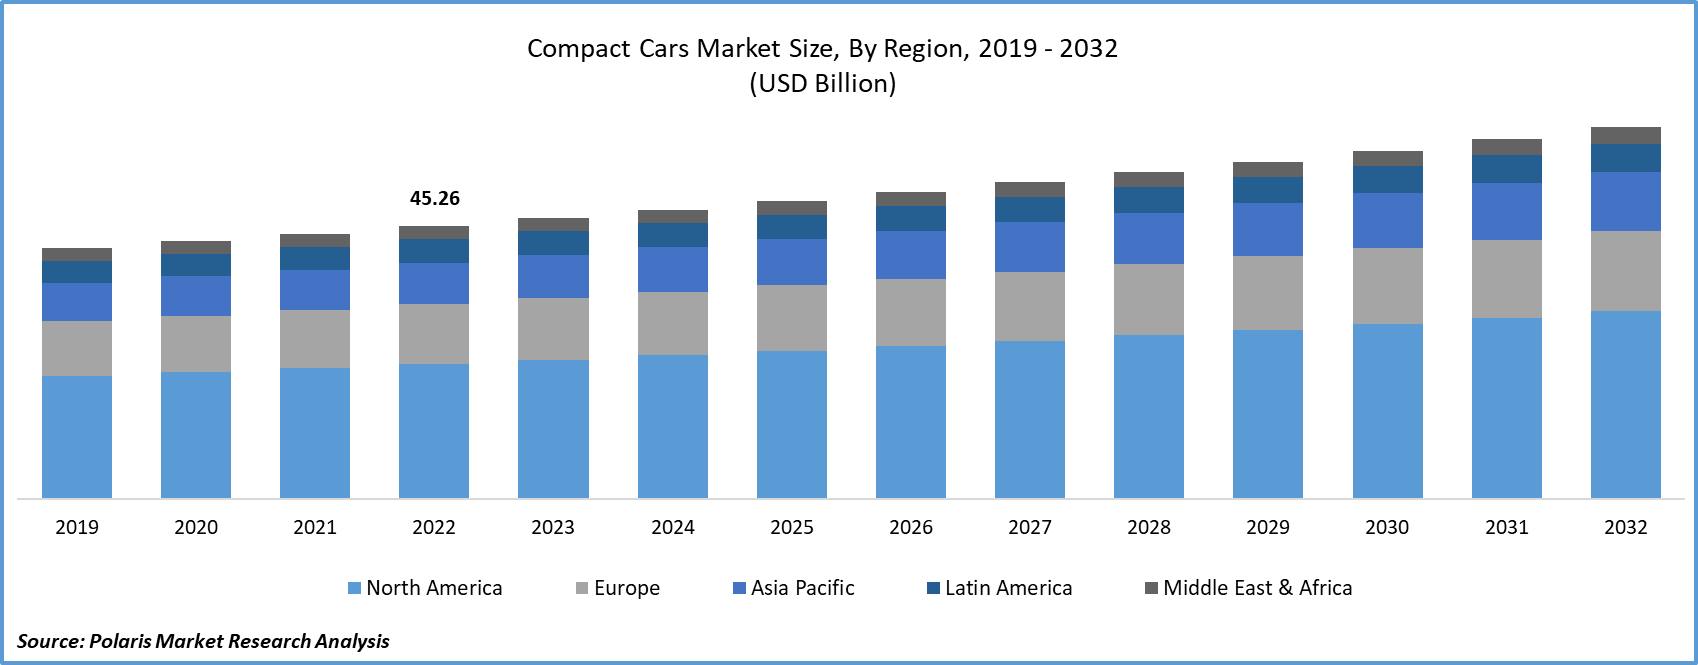 Compact Cars Market Size